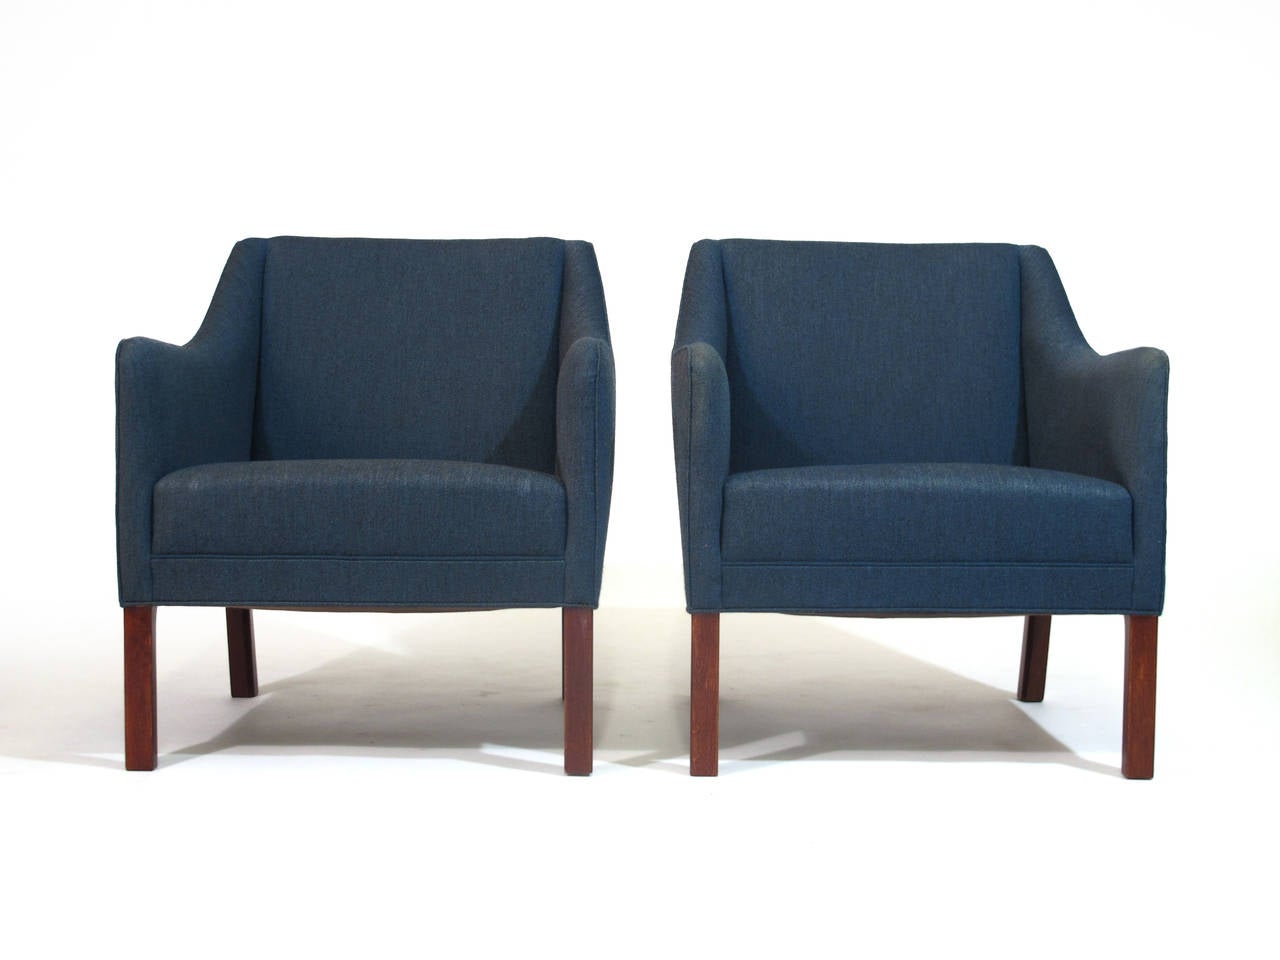 Scandinavian Mid-Century upholstered lounge chairs in original blue wool fabric. Designed by Børge Mogensen and Hans Wegner for Johannes Hansen. Solid wood frame with hand tied spring seat, raised on mahogany stained oak legs. Shown at the